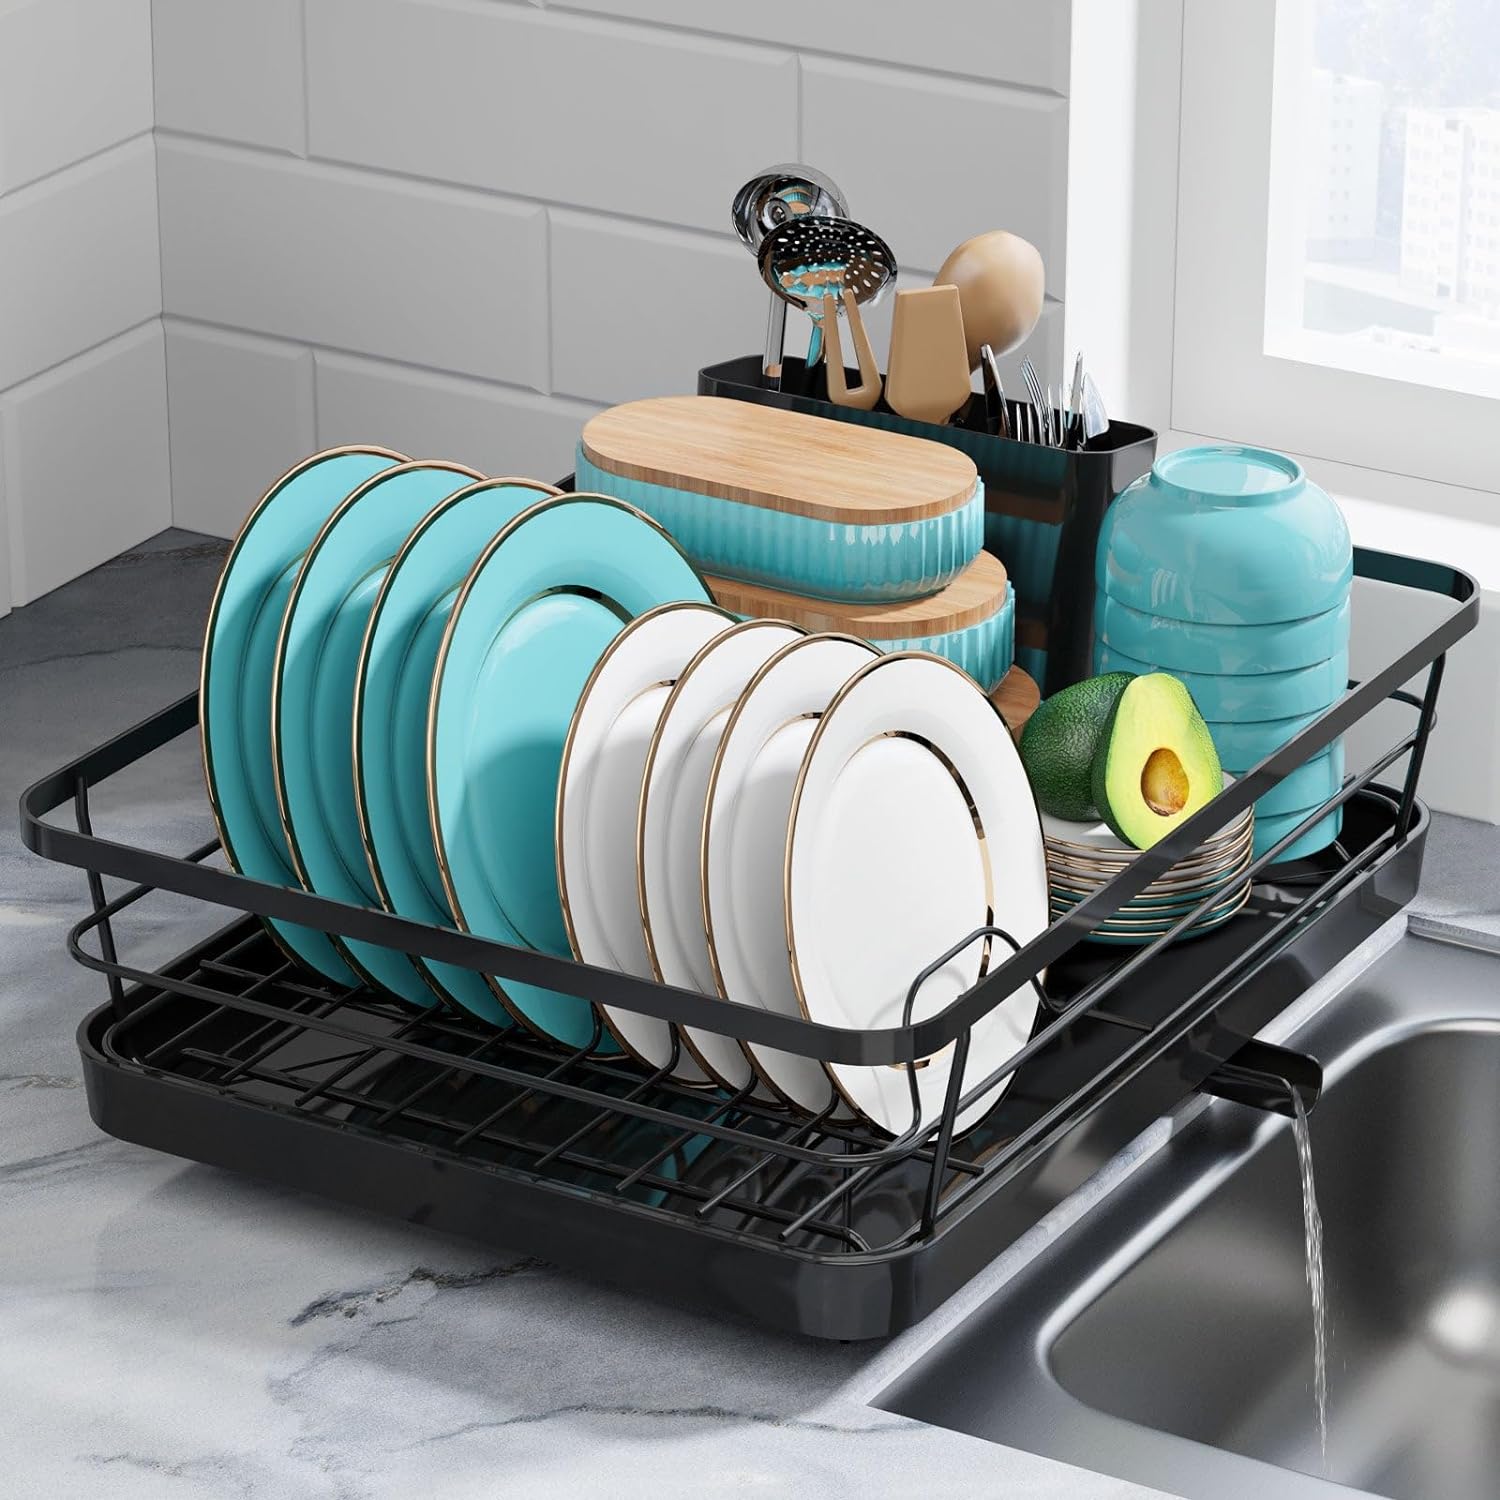 Unlock Your Savings Now! Act Fast for Exclusive Offers on Sakugi Dish Drying Rack